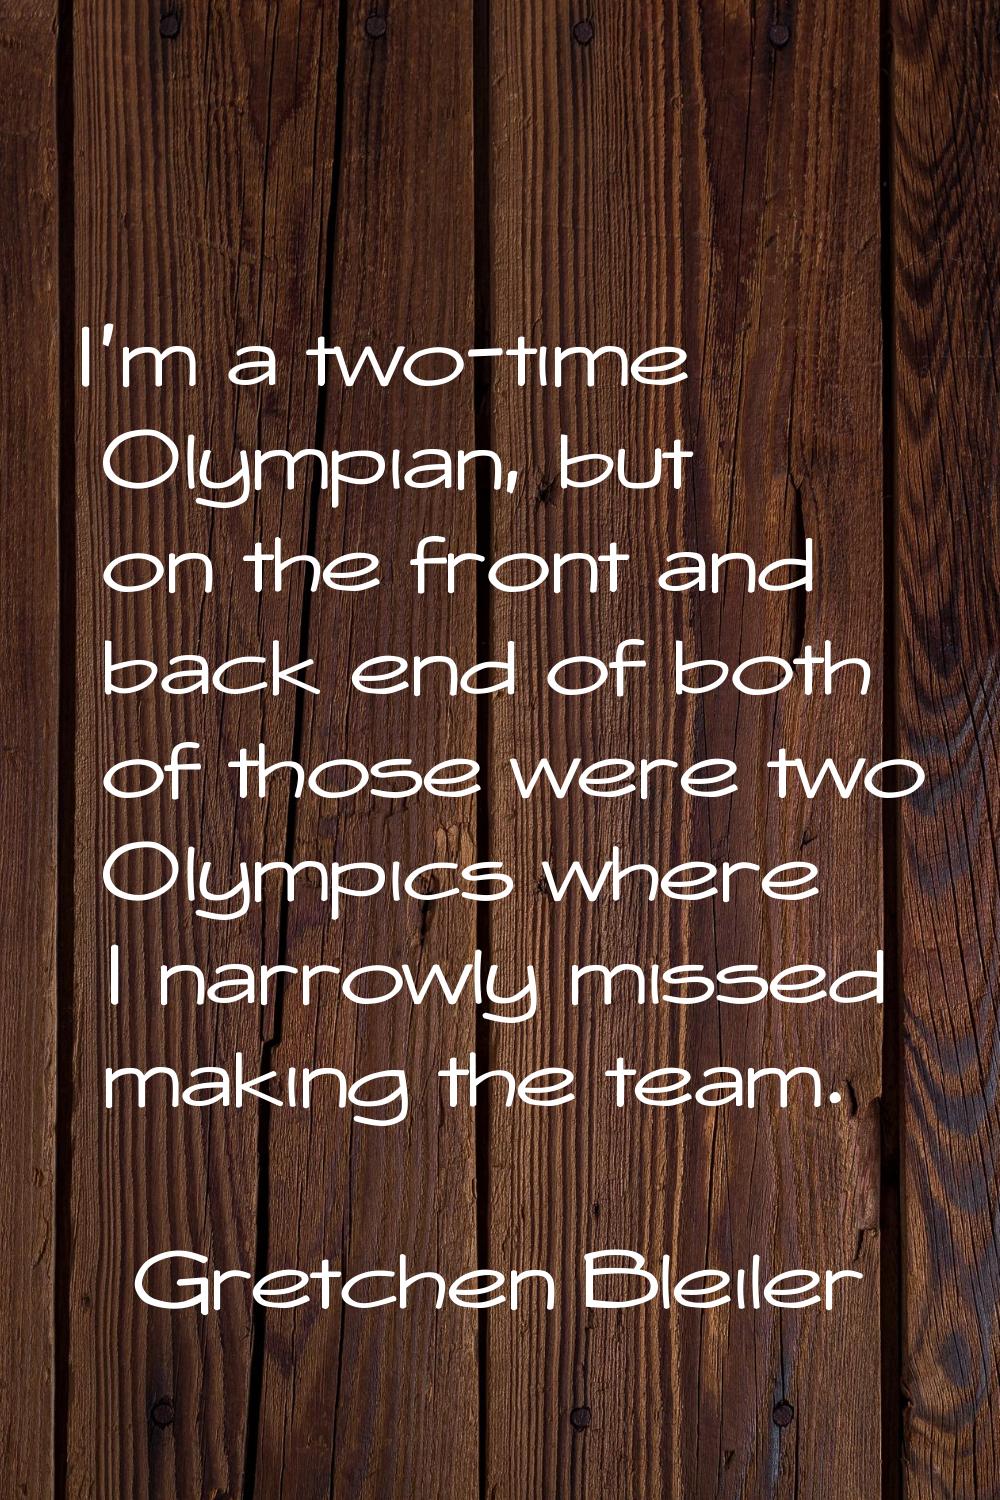 I'm a two-time Olympian, but on the front and back end of both of those were two Olympics where I n